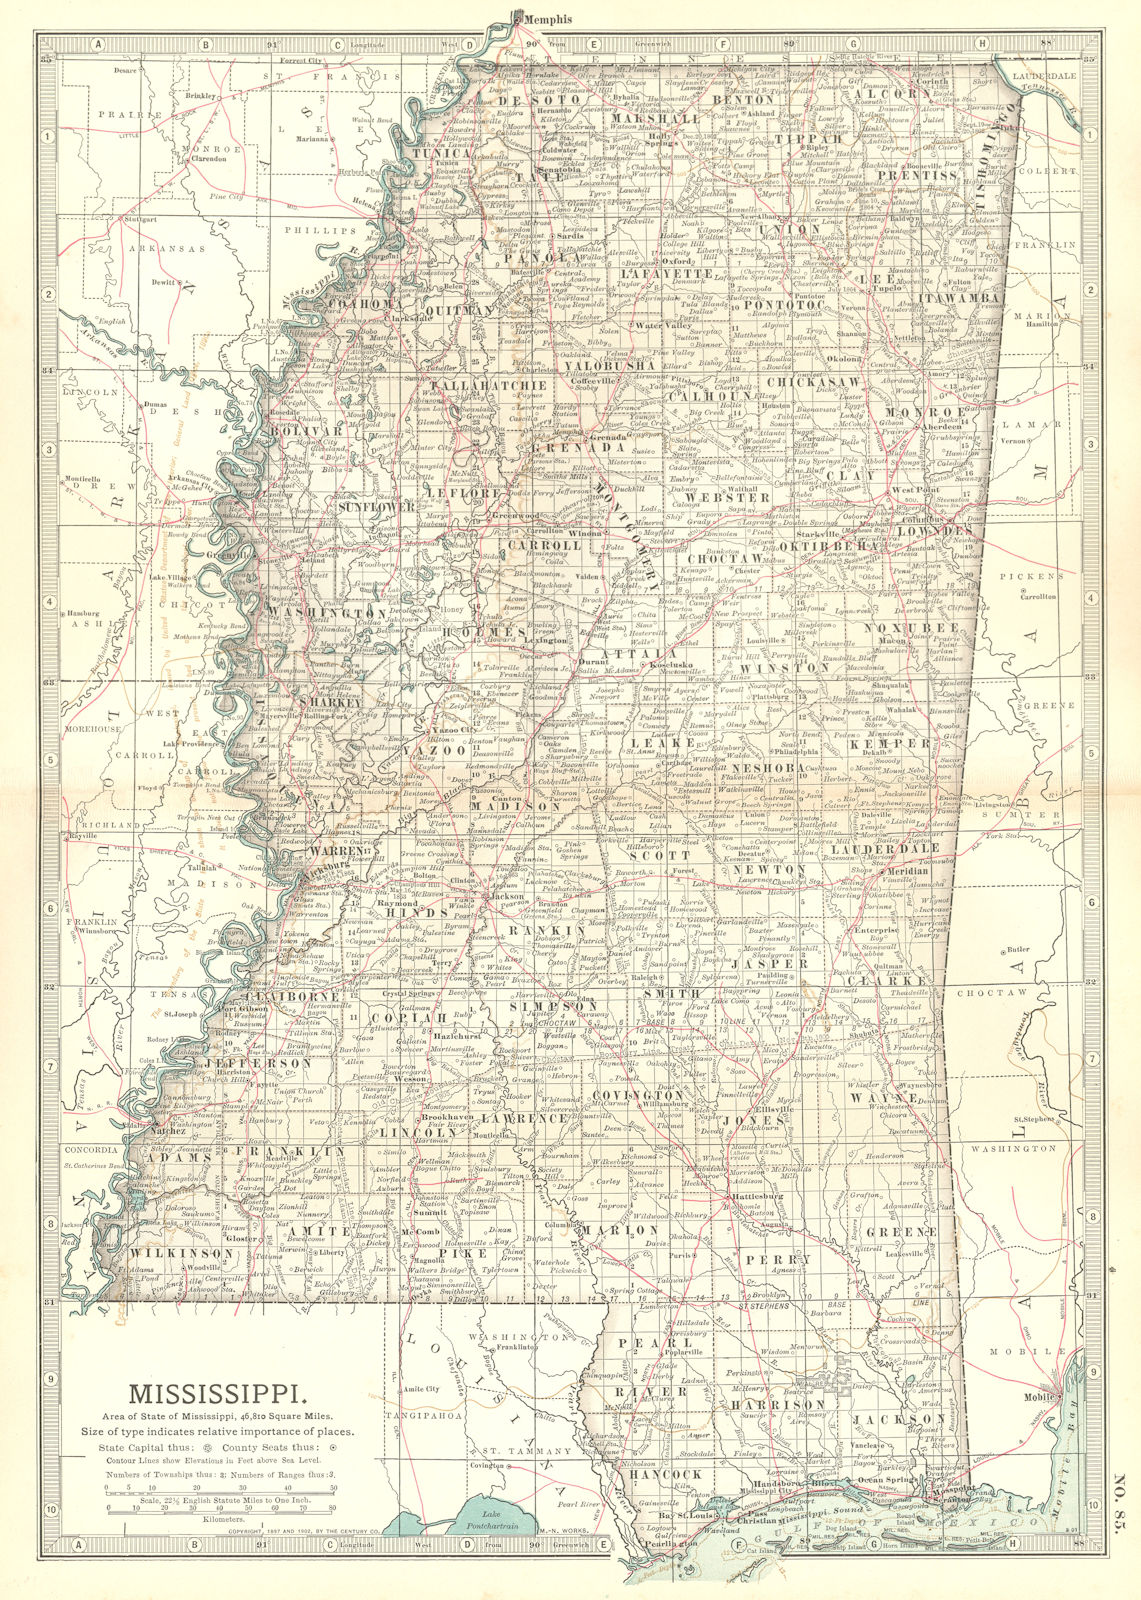 Associate Product MISSISSIPPI. State. Civil war battlefields/dates.Choctaw treaty lines 1903 map